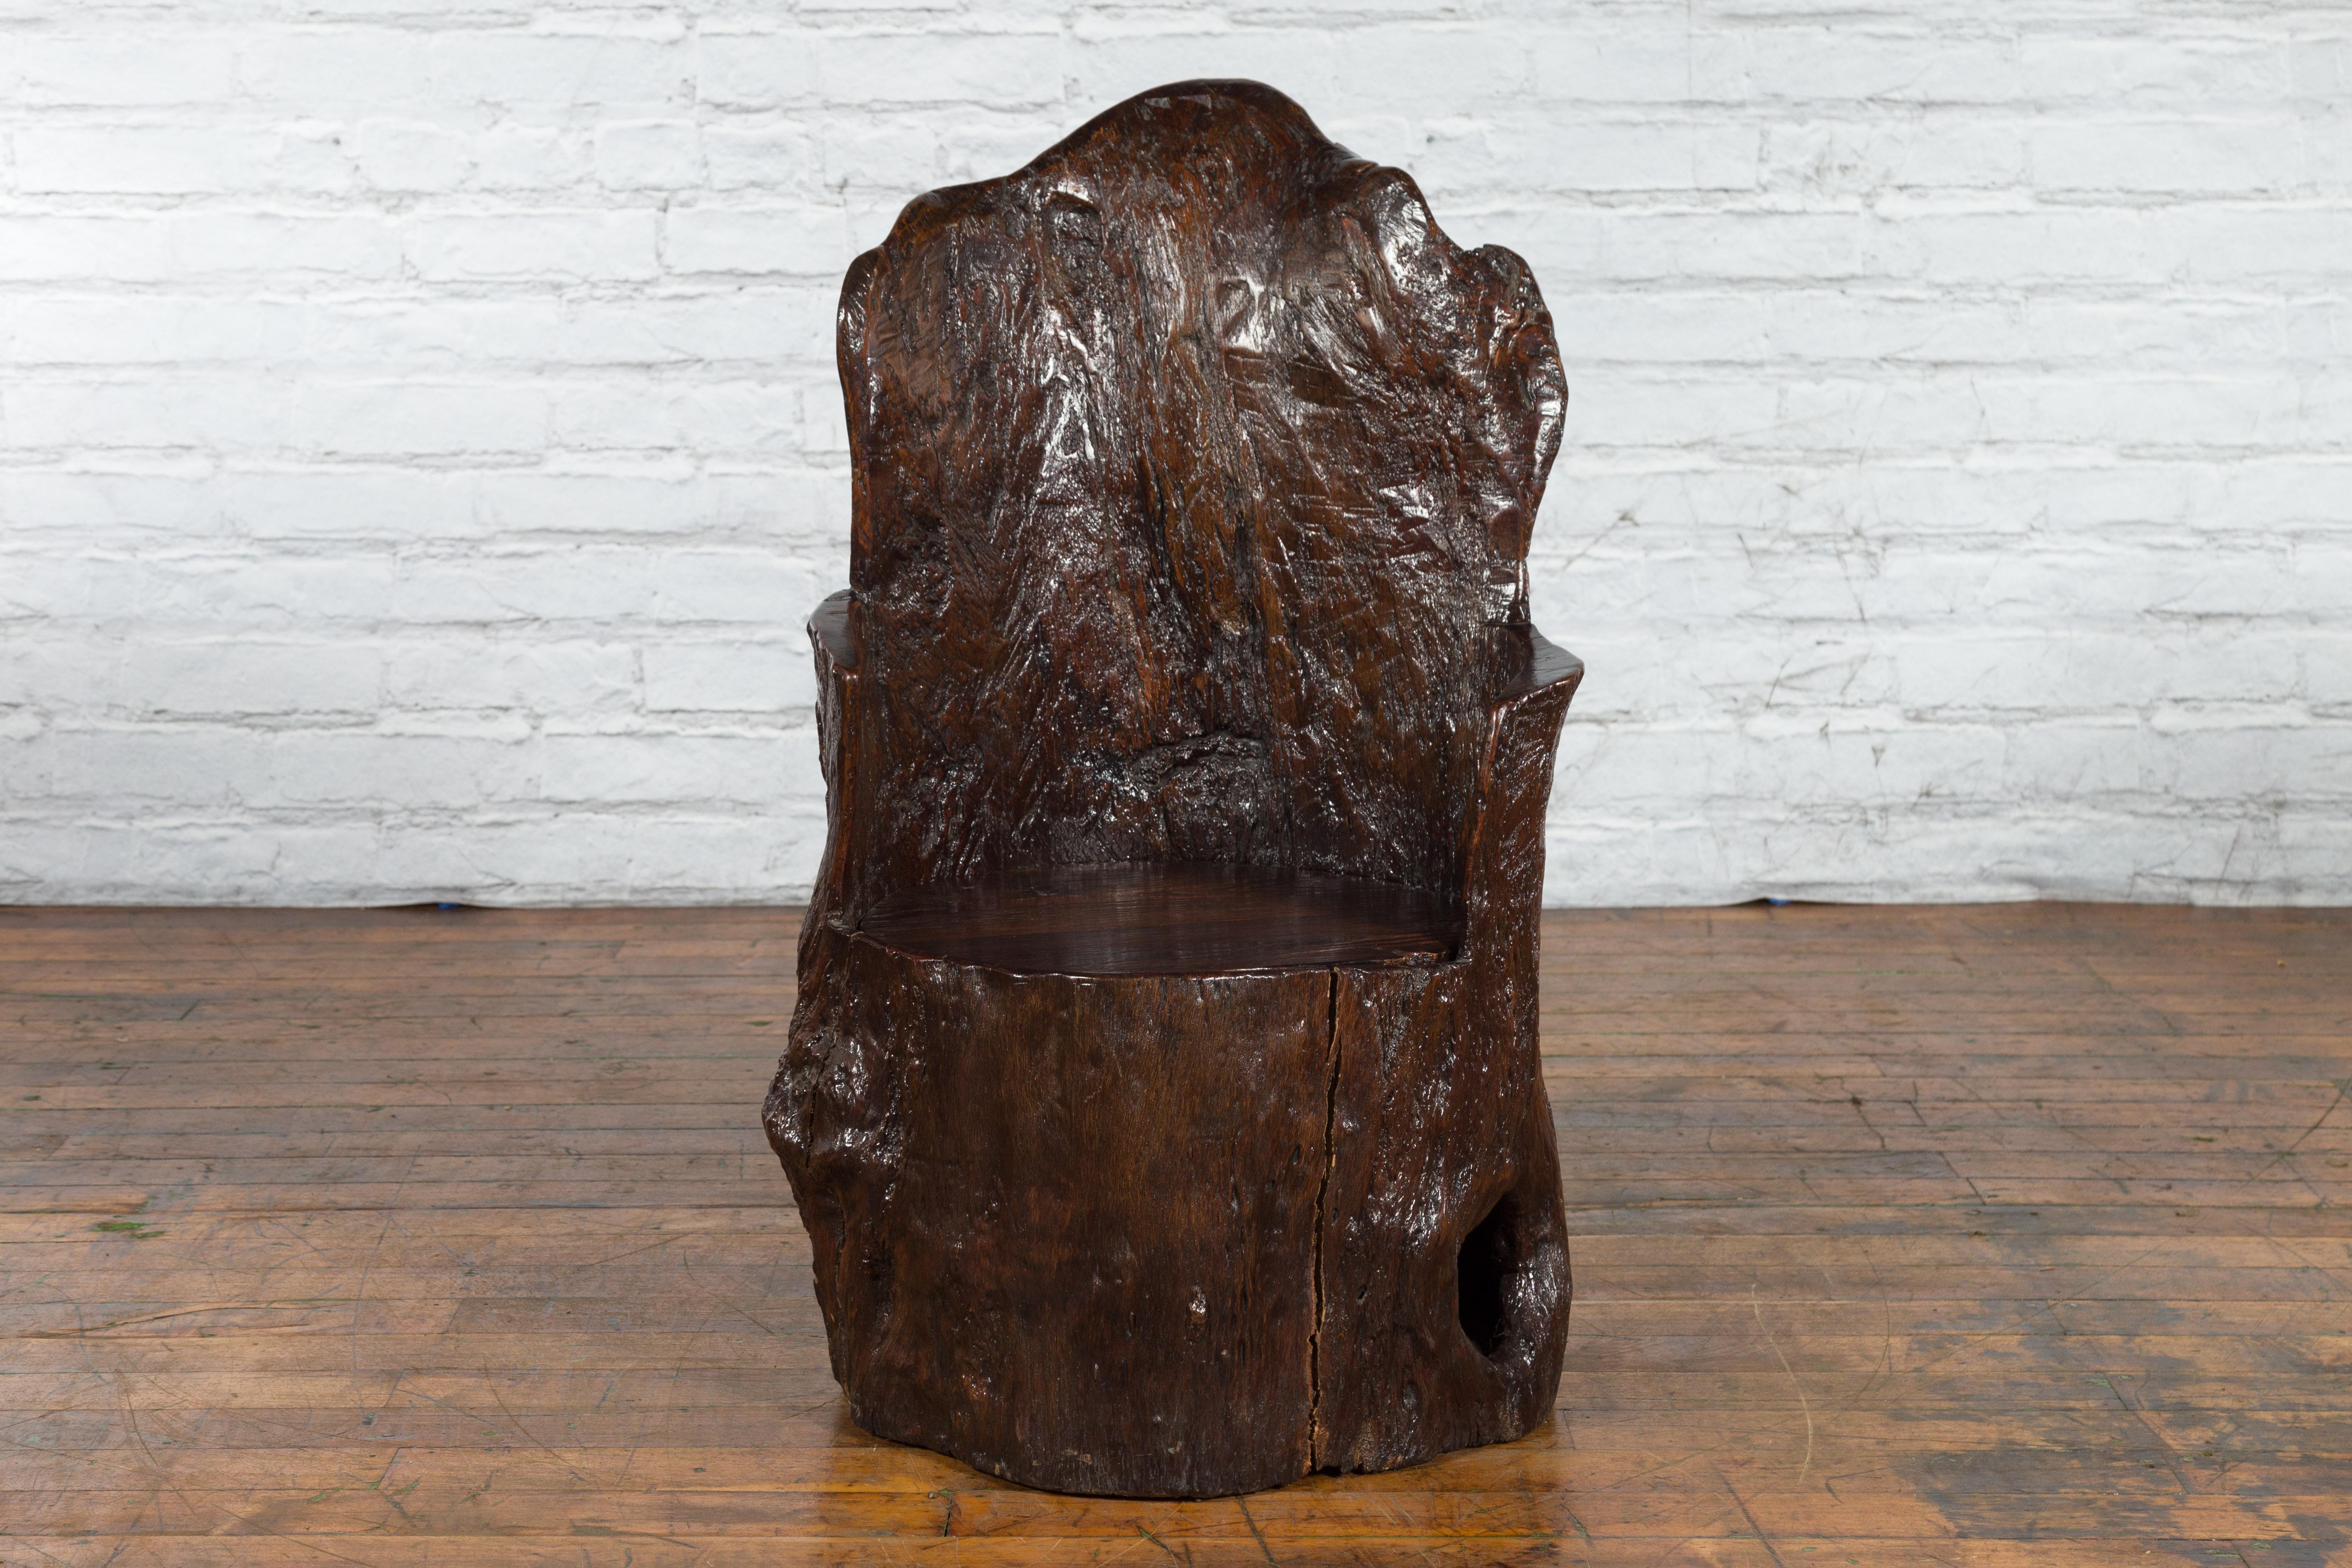 Wood Rustic Cantonese Armchair Carved from a Tree Trunk with Hidden Compartment